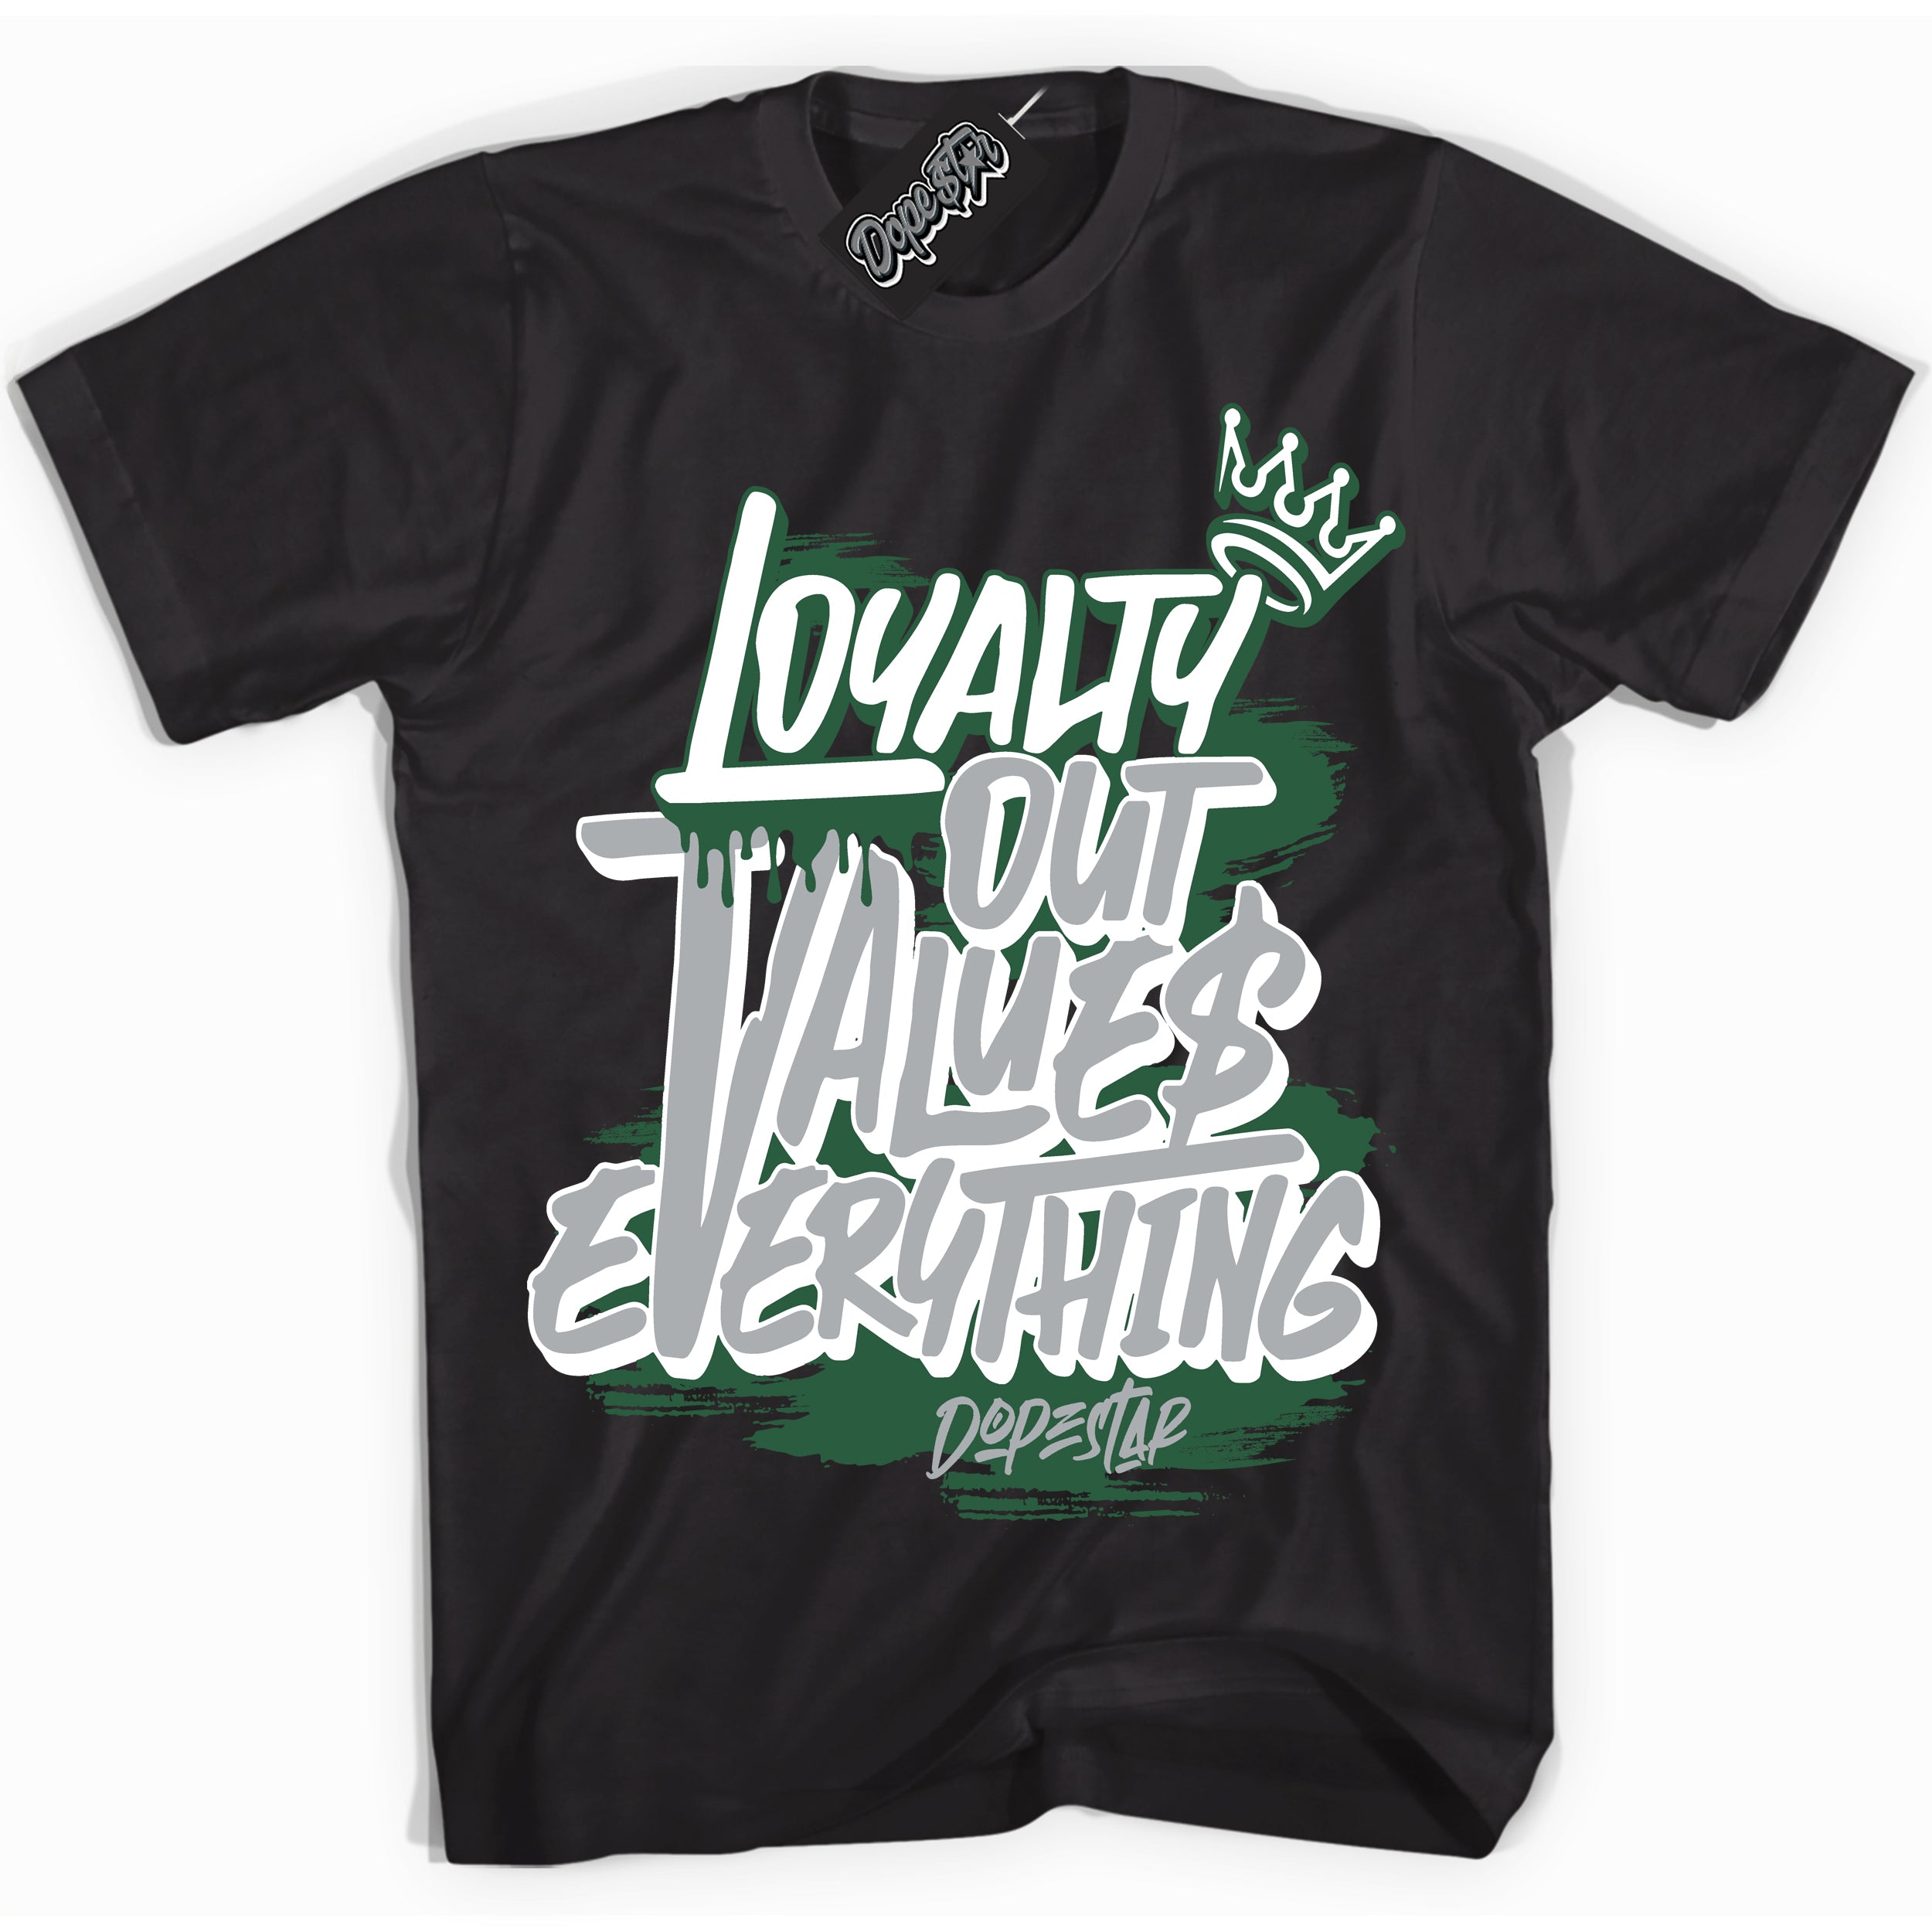 Cool Black Shirt with “ Loyalty Out Values Everything” design that perfectly matches Gorge Green 1s Sneakers.